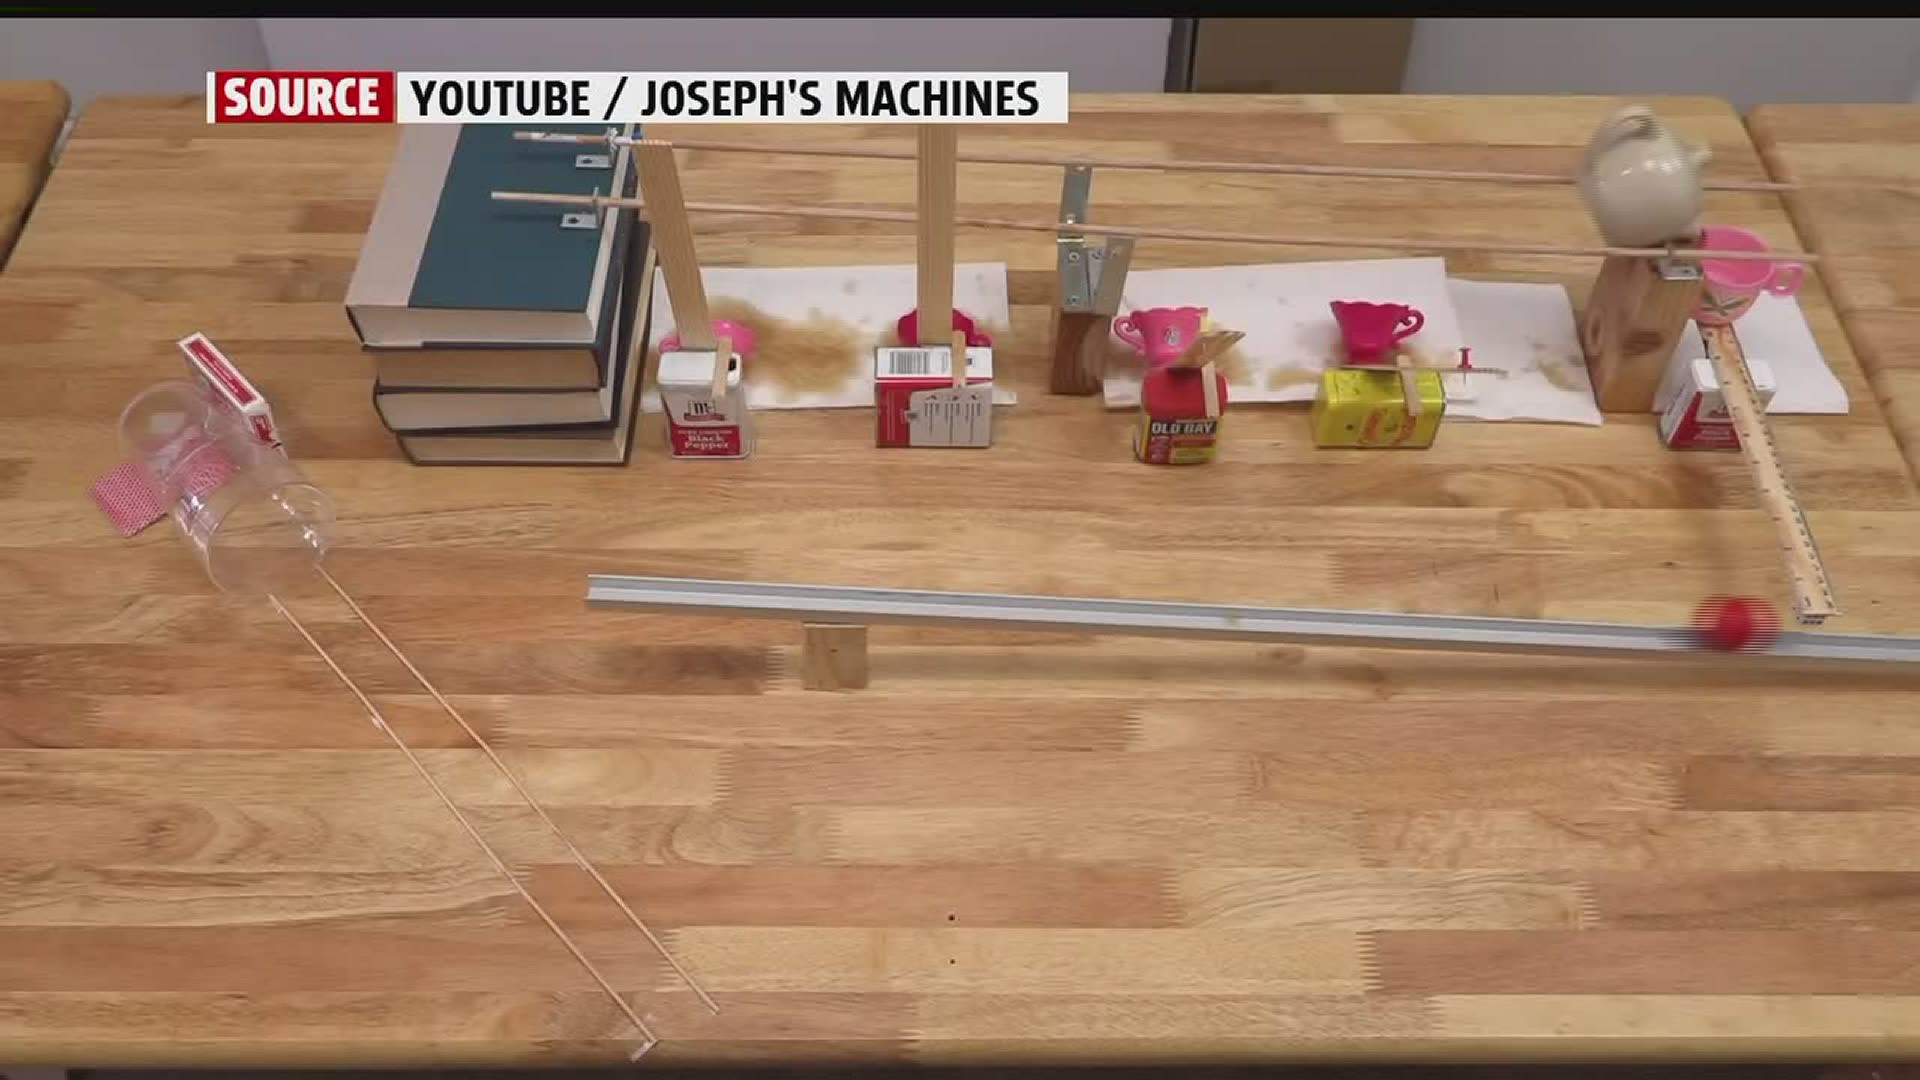 Using things like dominoes, rubber balls and home-made ramps, see how crazy you can make your machine -- before it all falls apart!